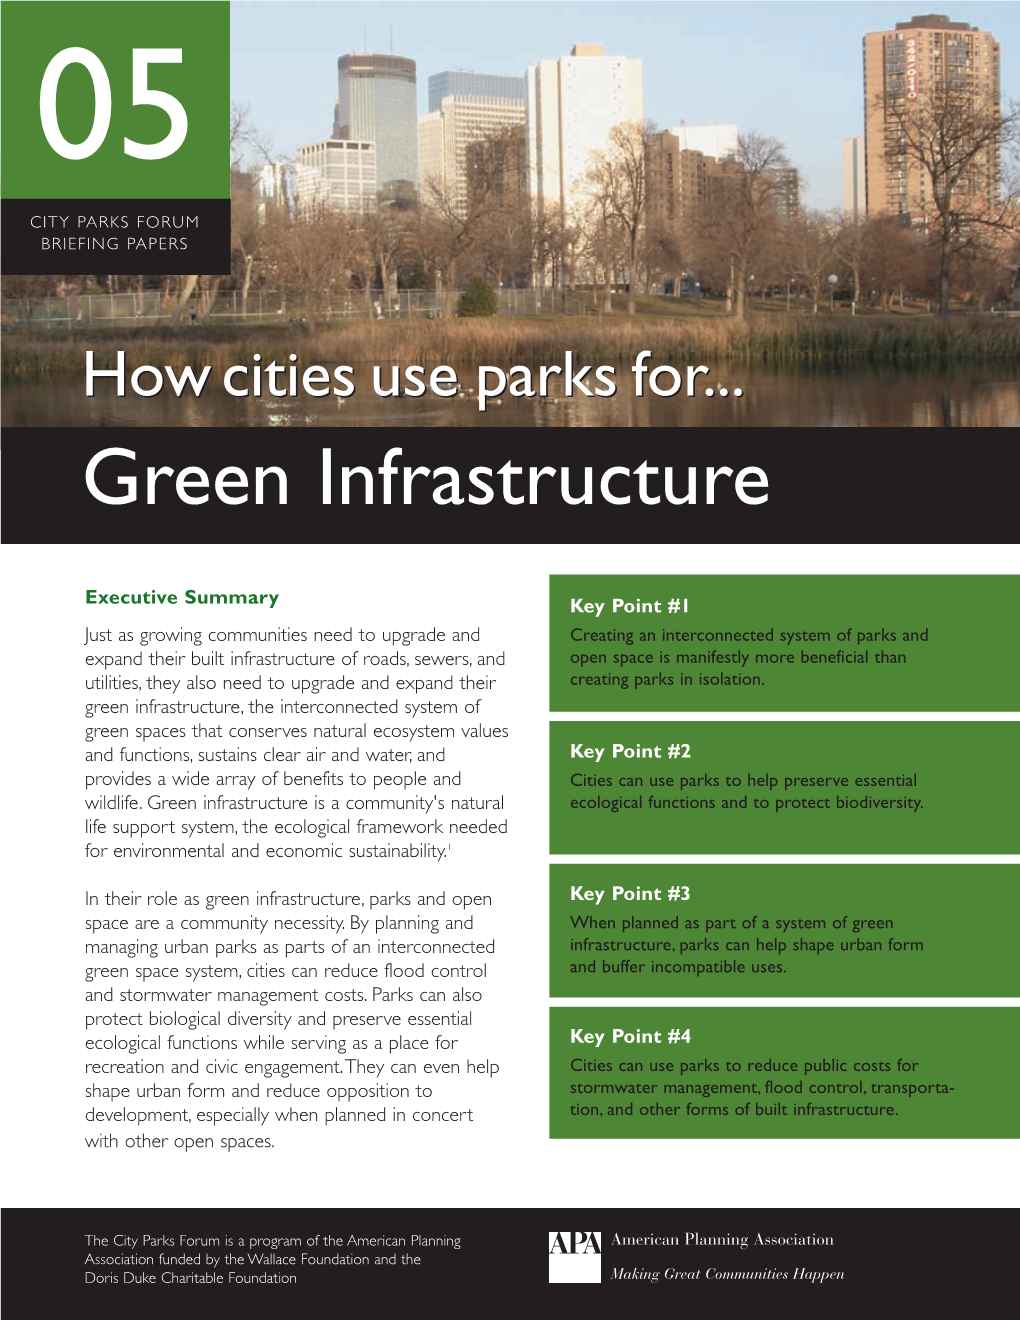 How Cities Use Parks for Green Infrastructure